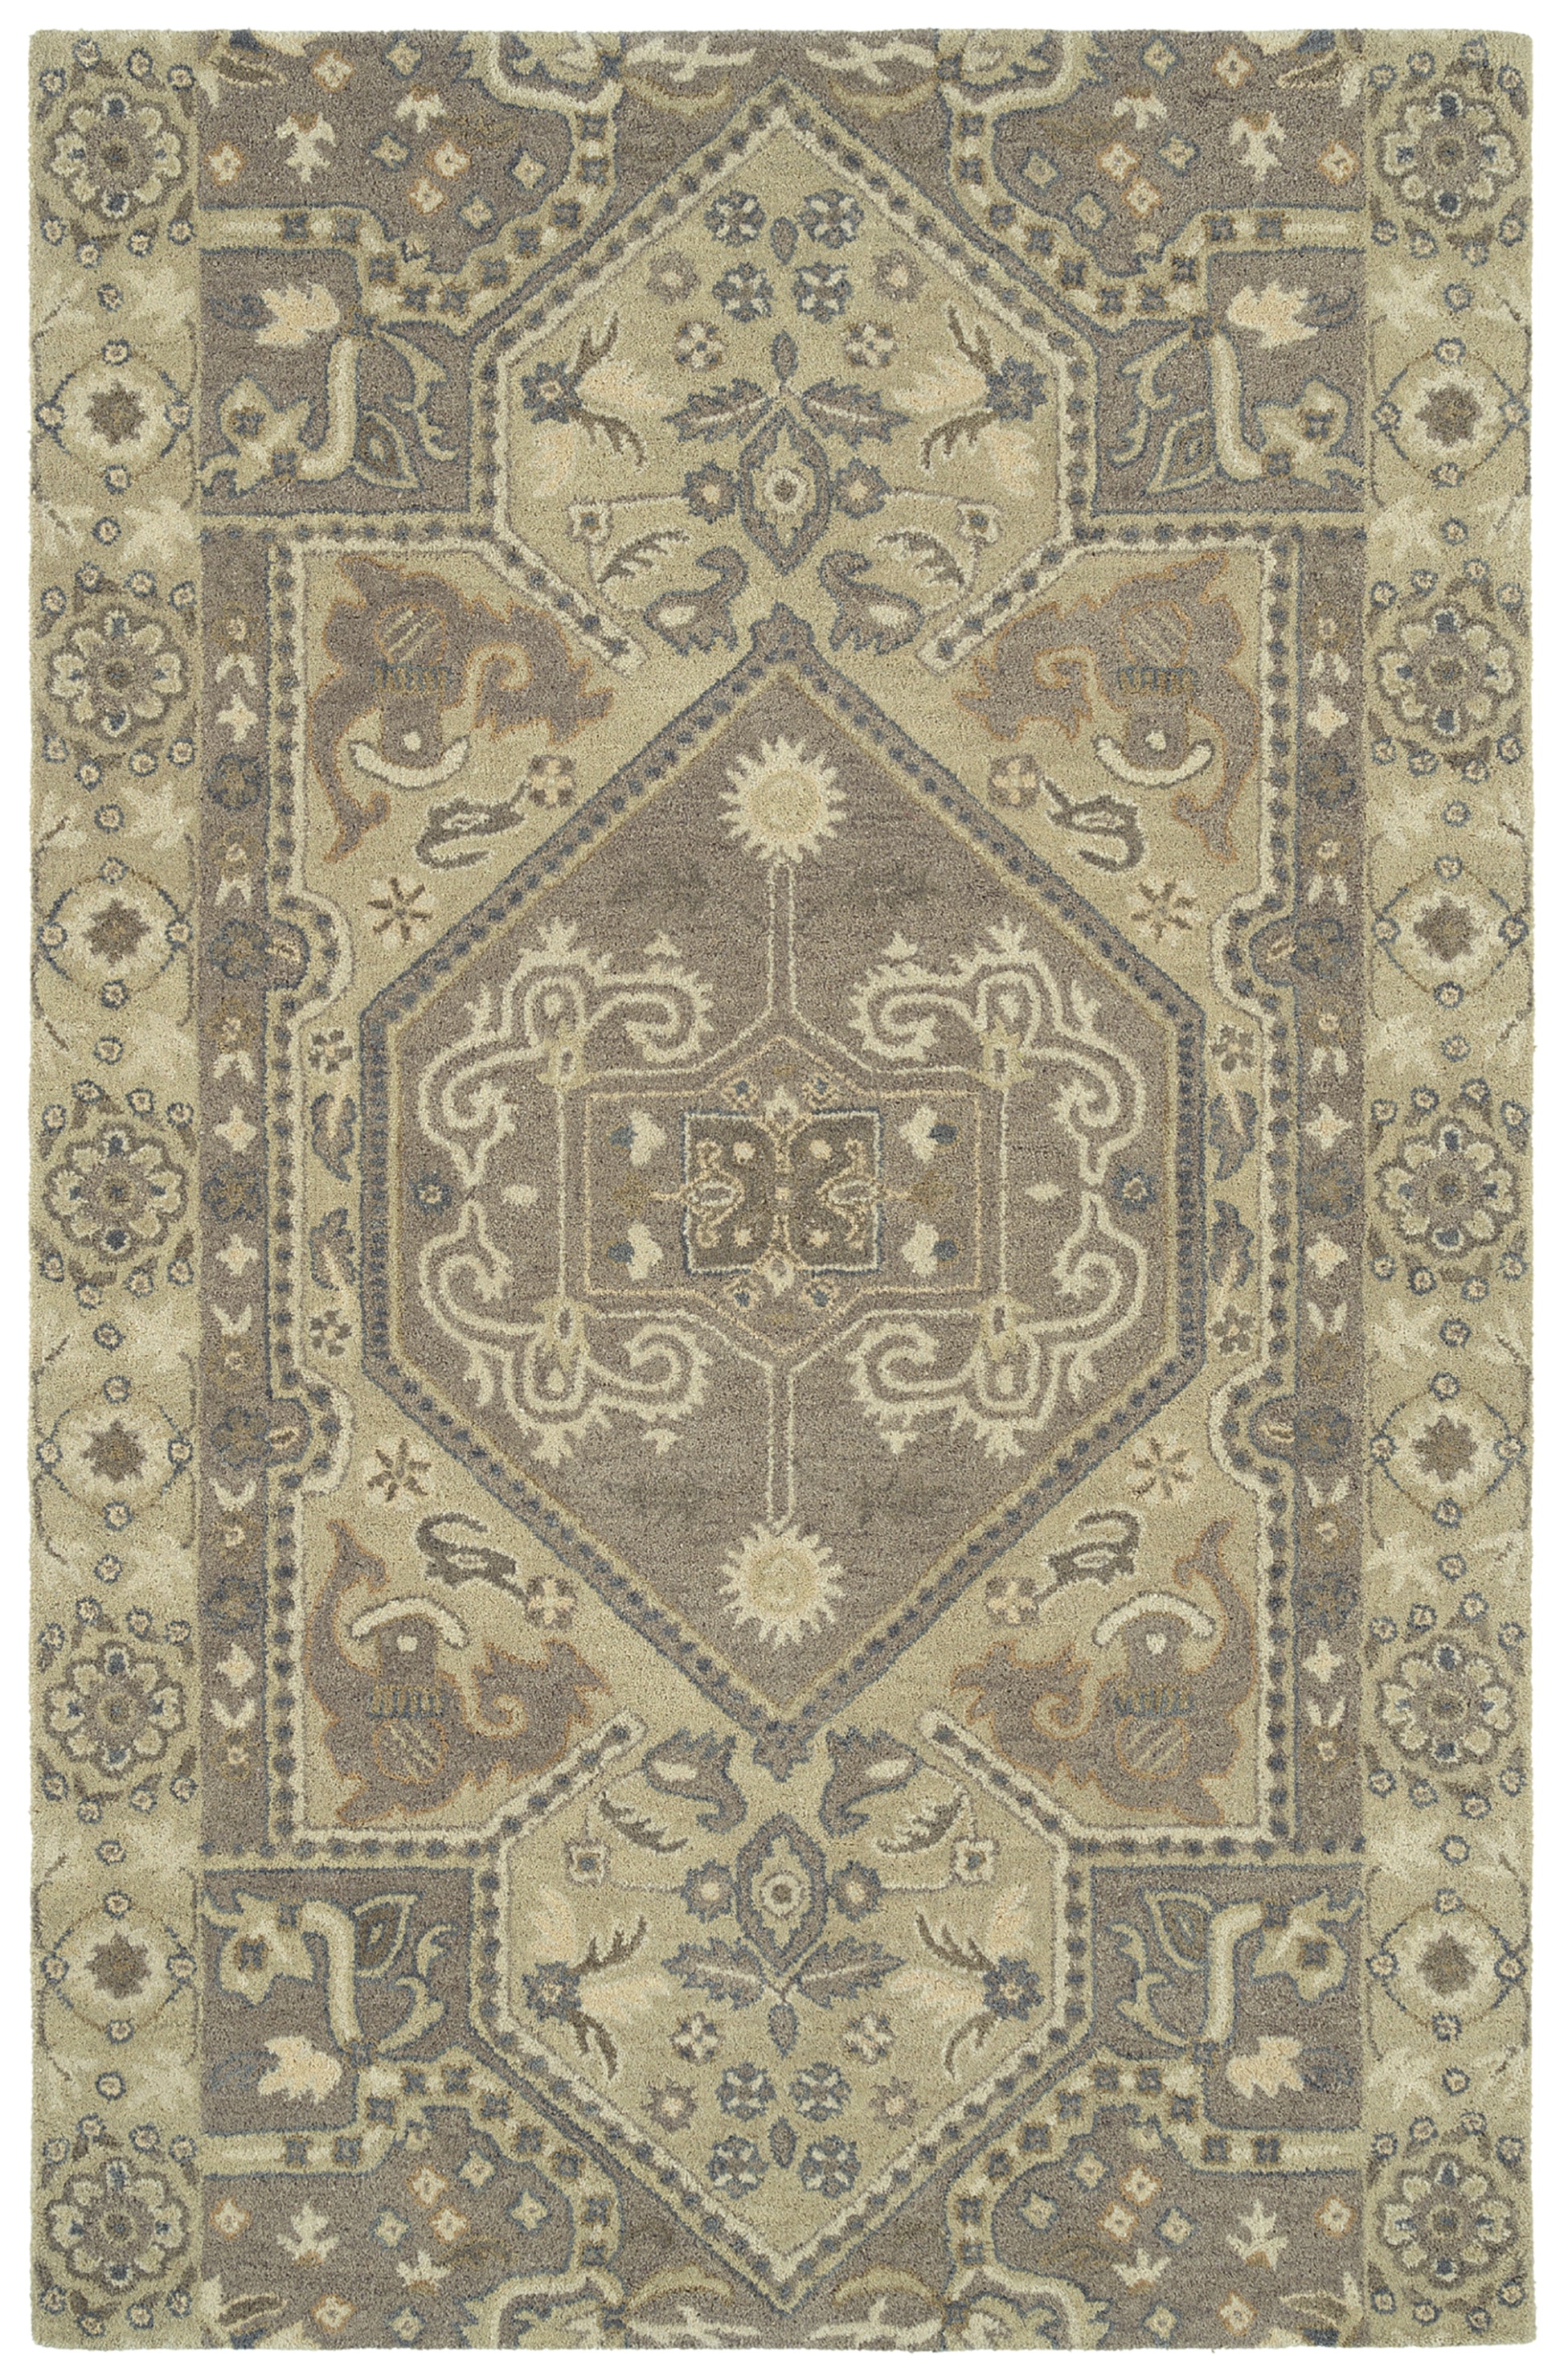 Kaleen Helena 3219-75 Gray, Taupe, Charcoal, Pewter Area Rug